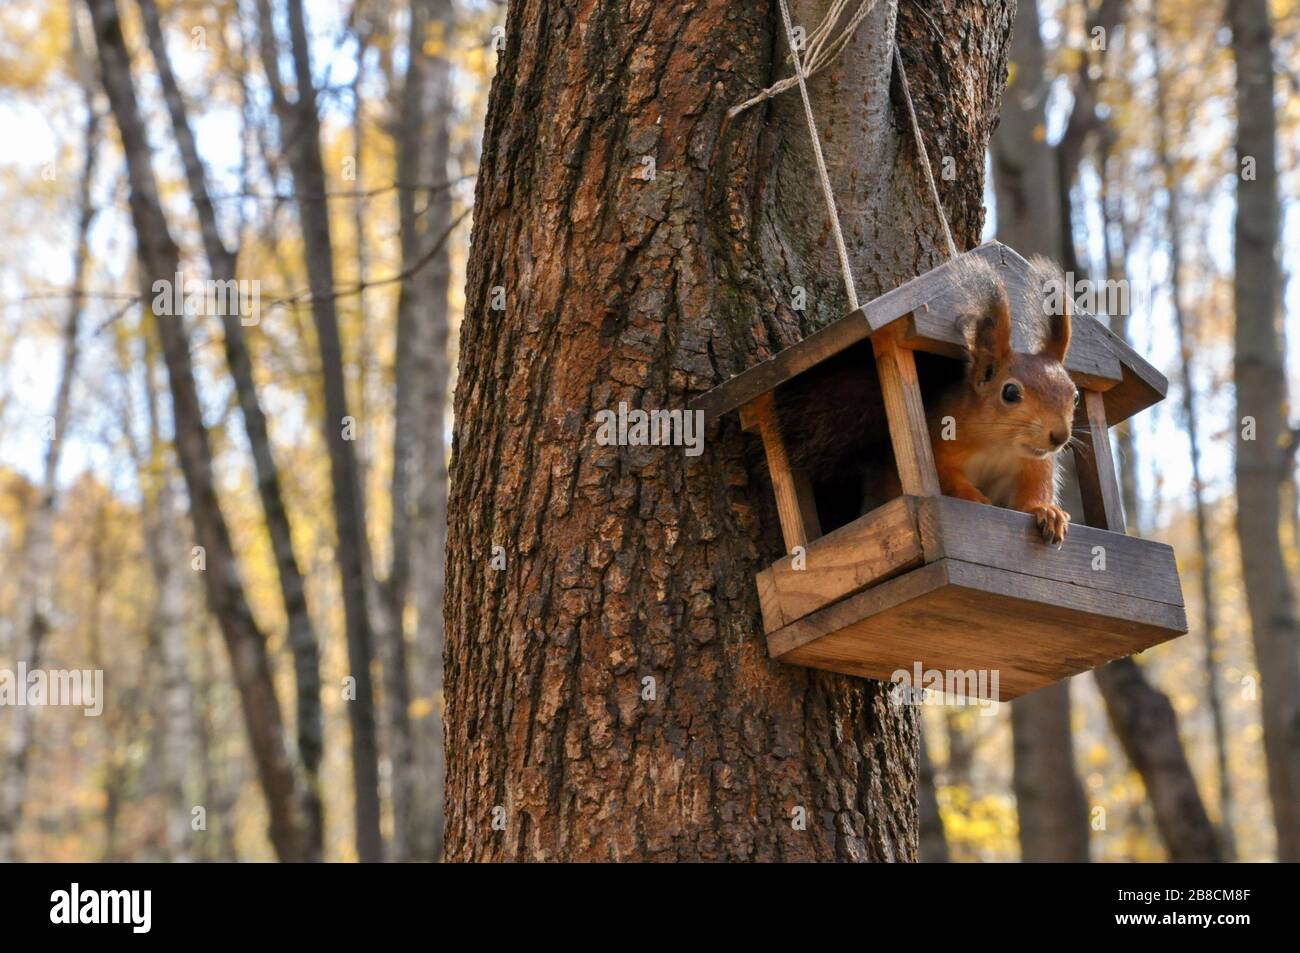 Pretty squirrel is looking out from bird feeder house. Stock Photo